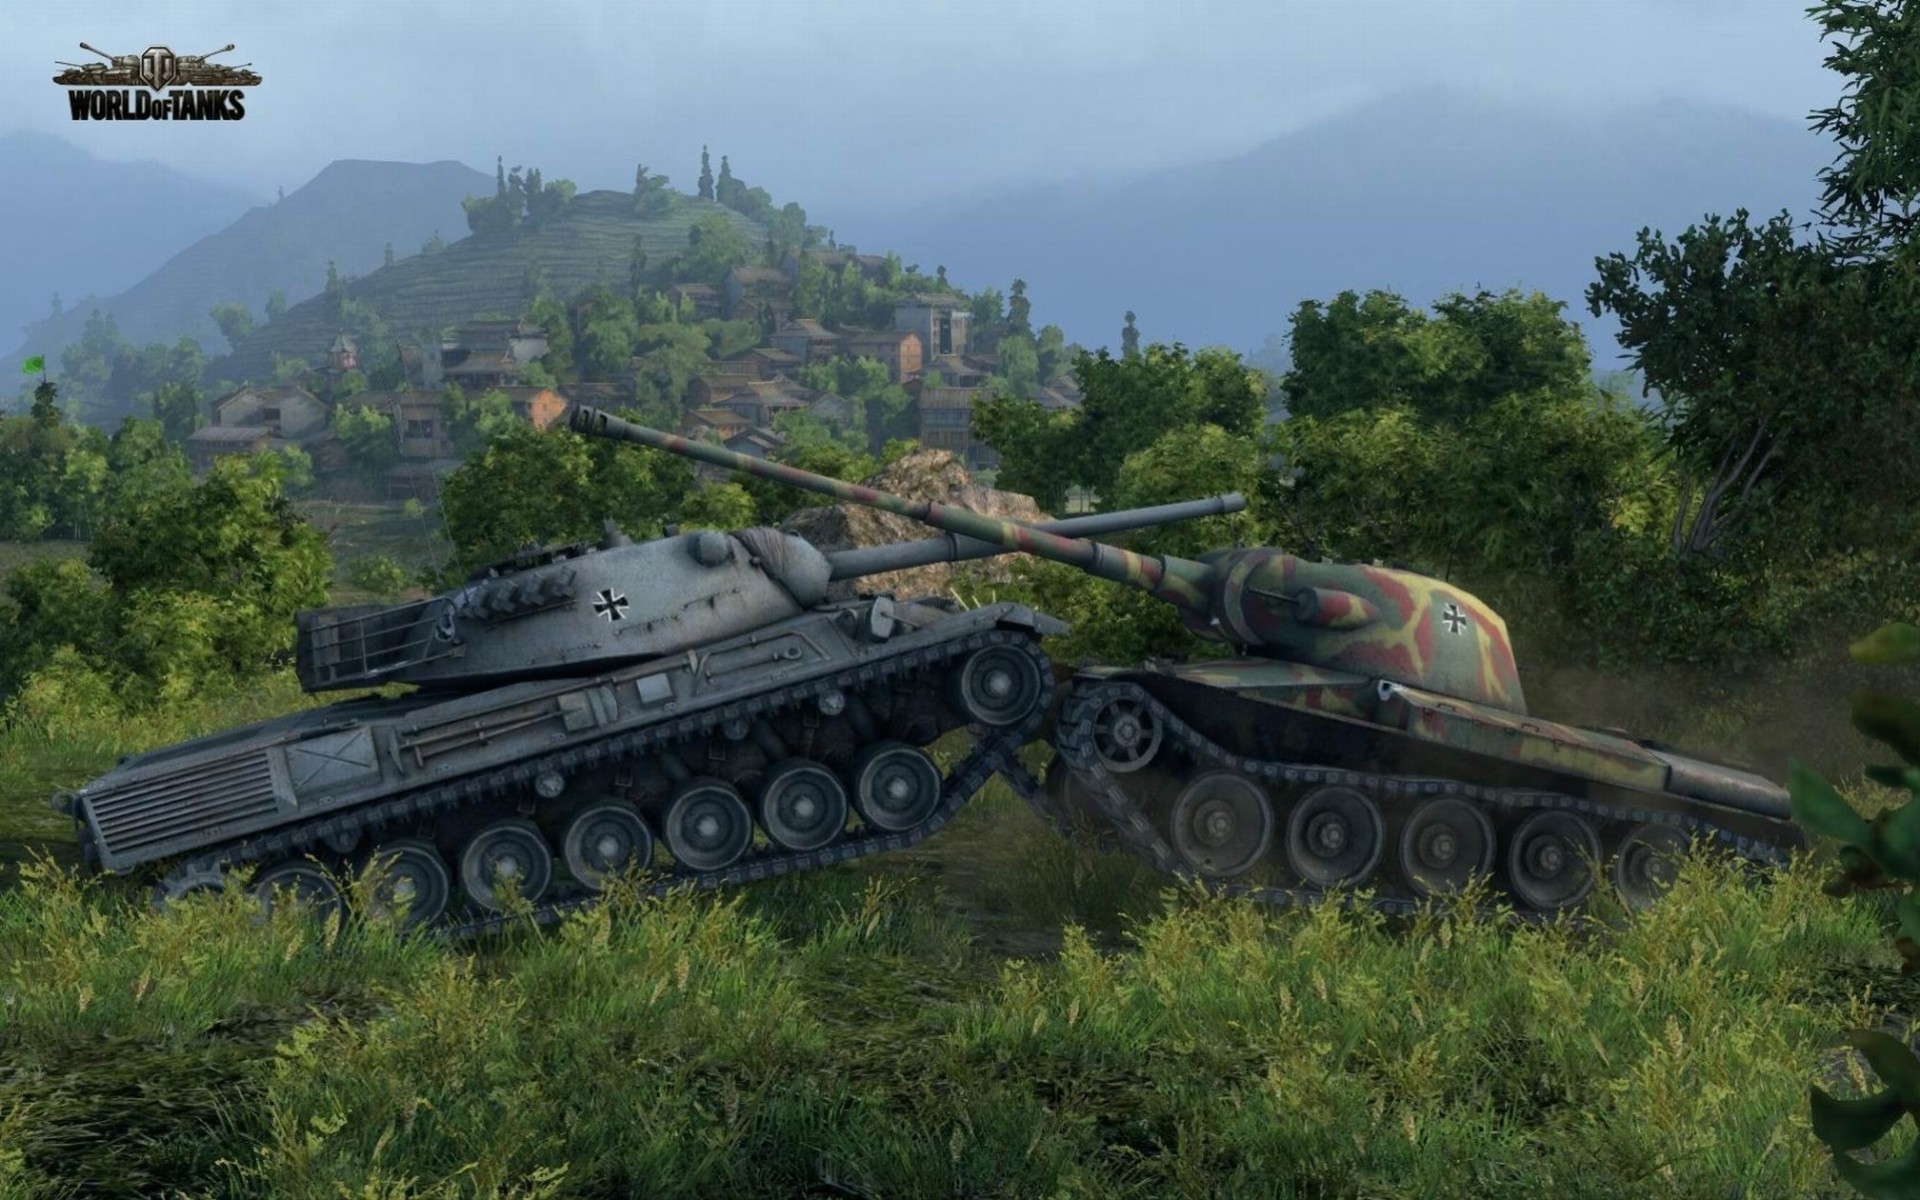 Wot from wit. Танки игра World of Tanks. Танки из игры World of Tanks. Танк из World of Tanks. Картинки танков World of Tanks.